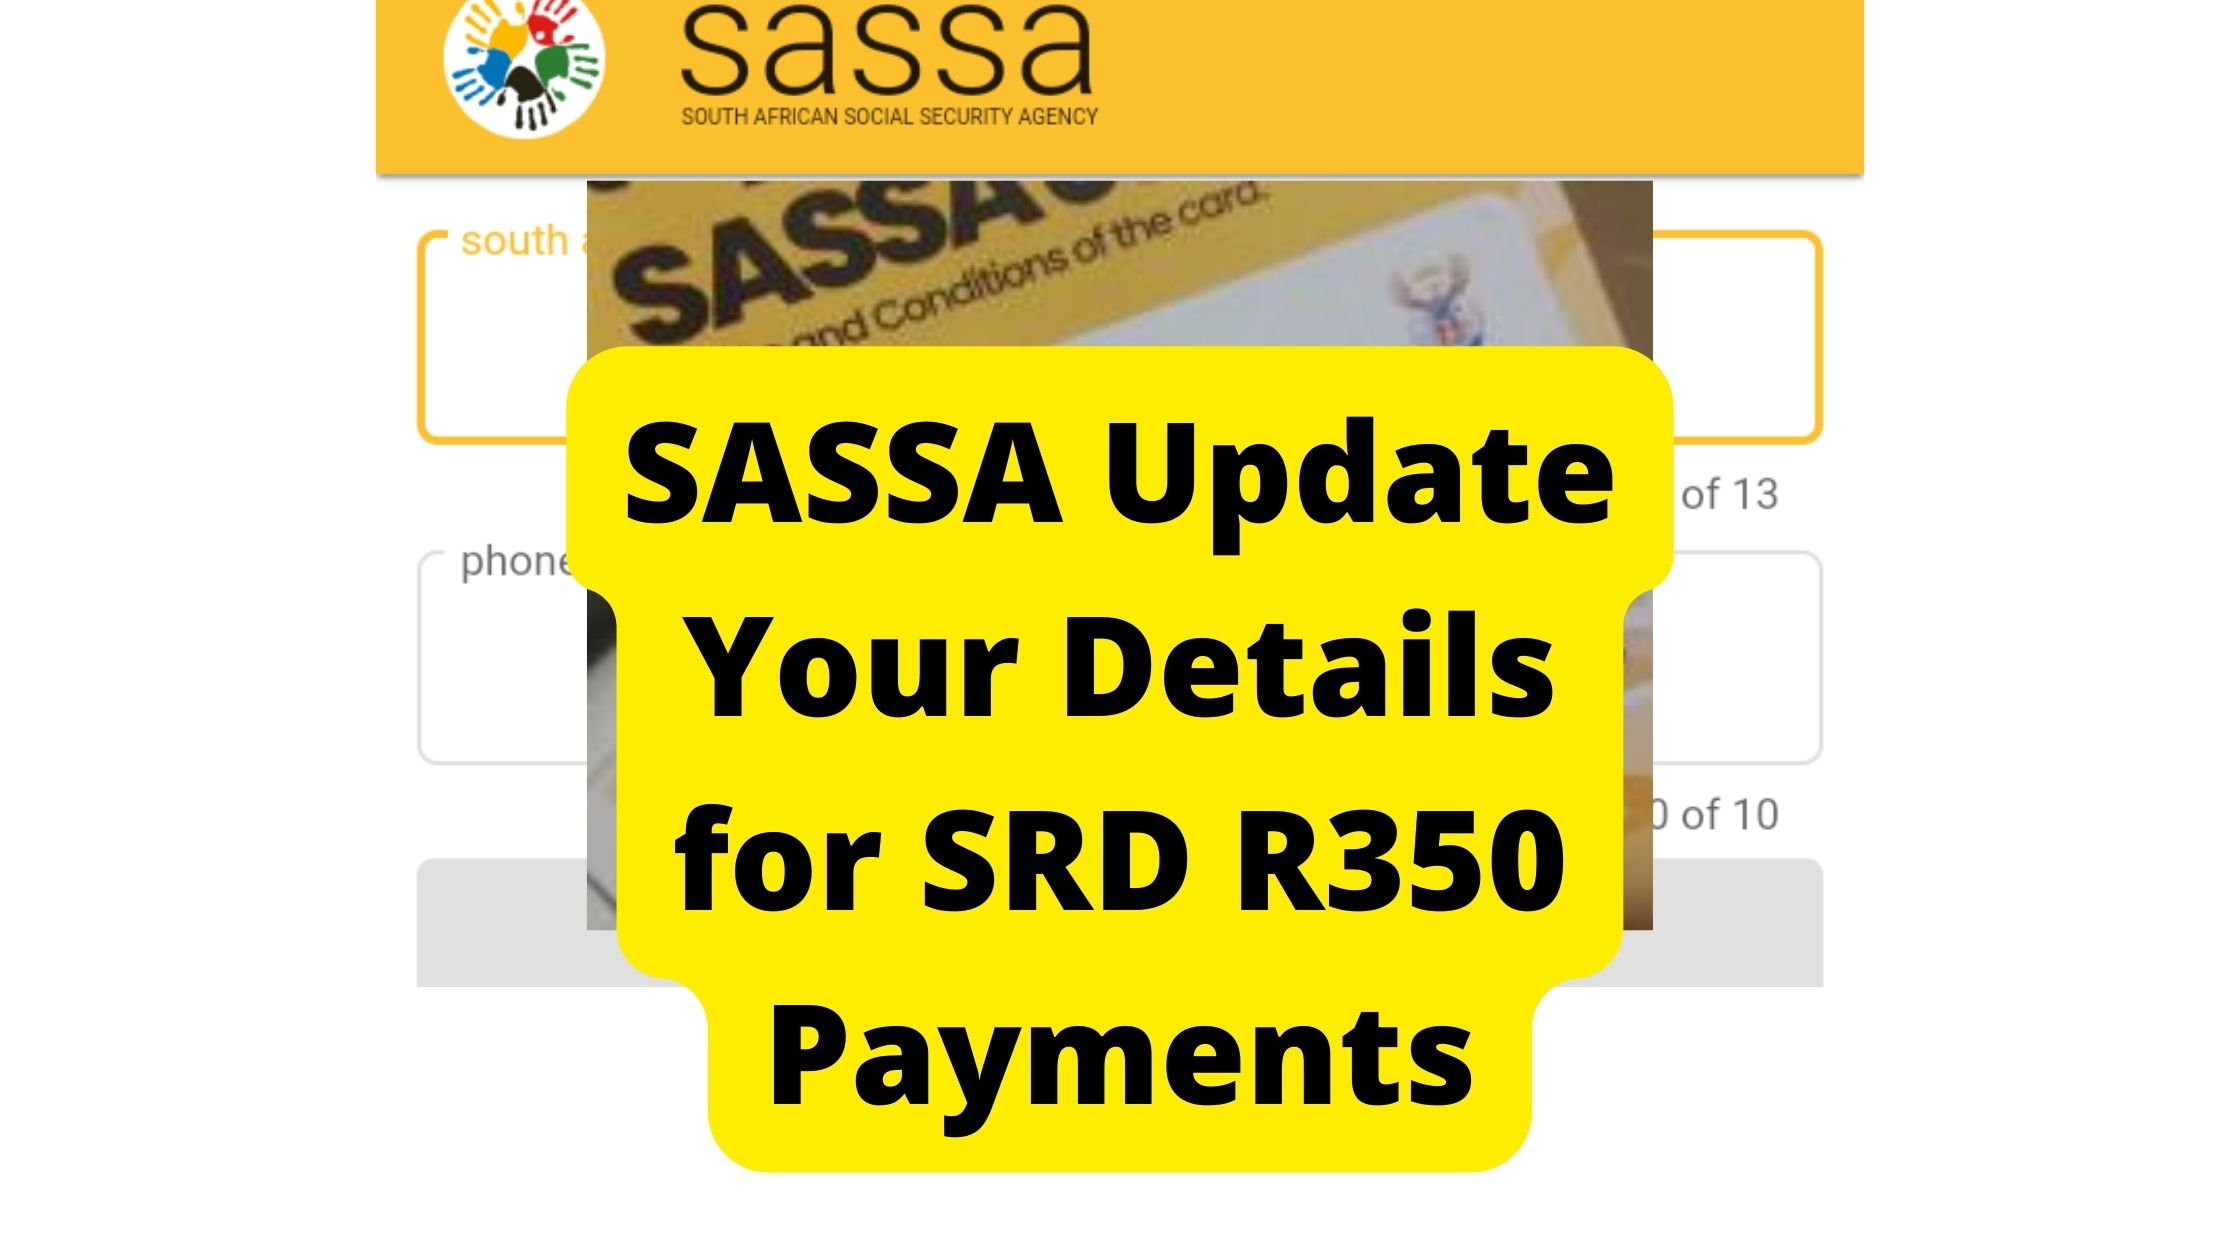 SASSA Update Your Details for SRD R350 Payments